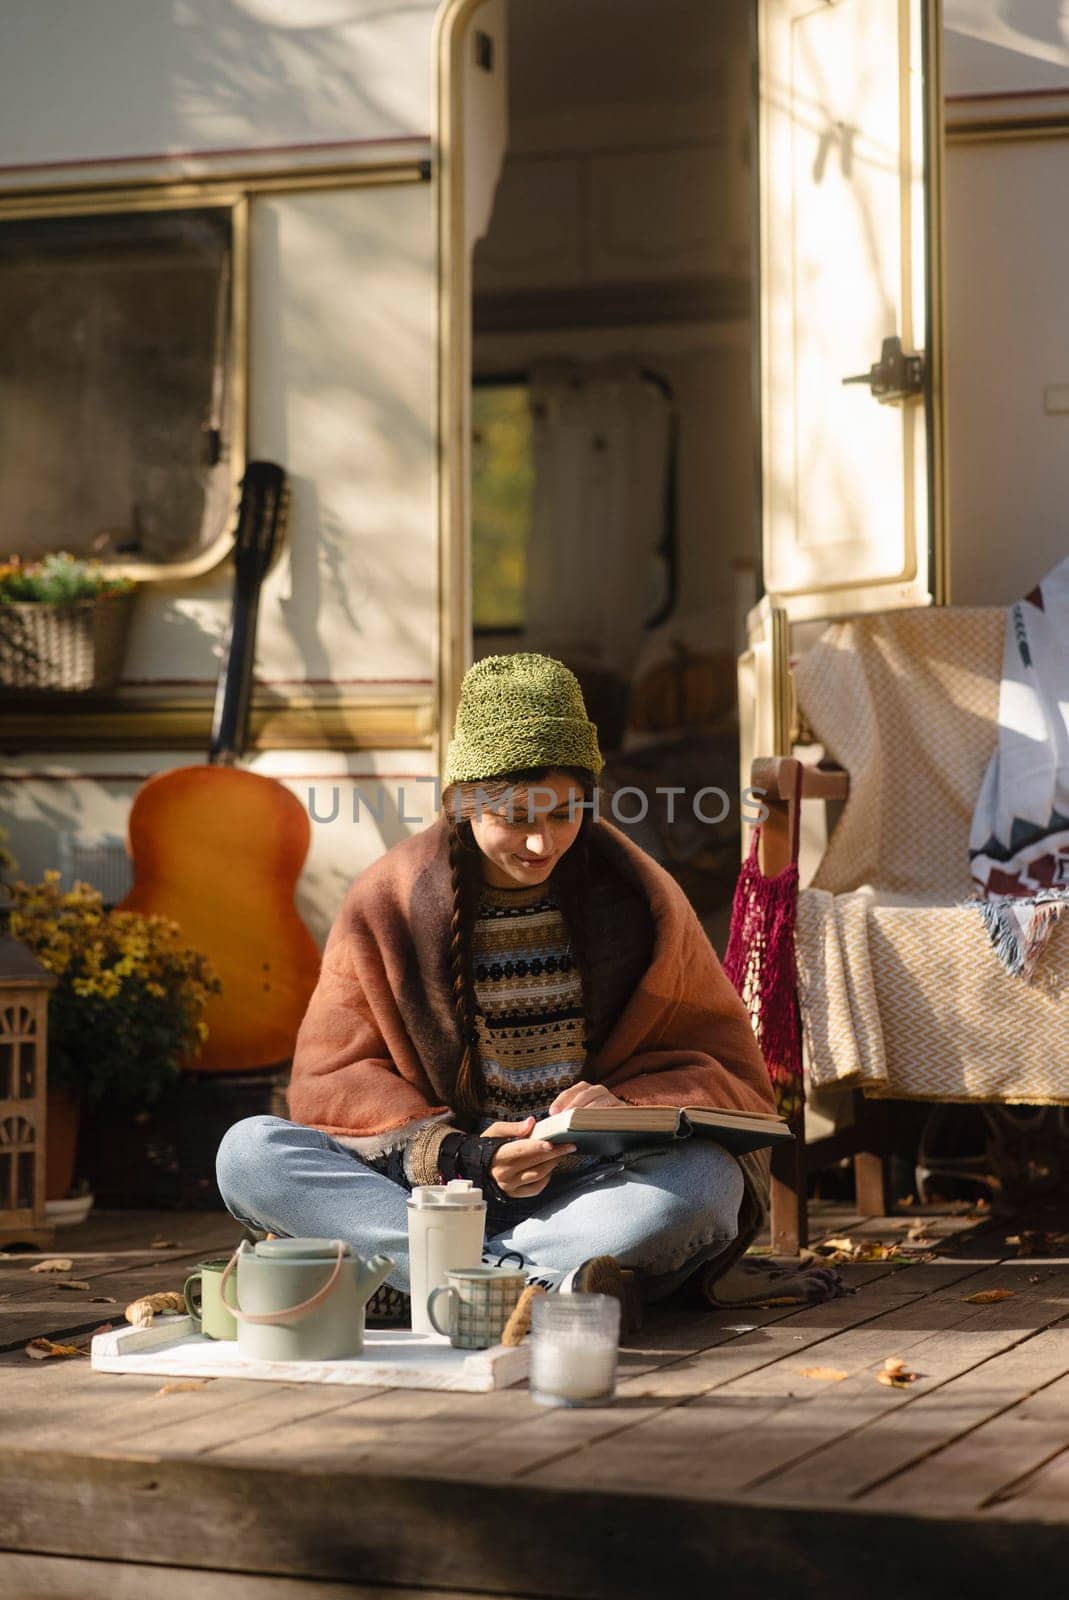 A trendy, hippie-inspired girl relishes a hot beverage on the house terrace, showcasing her style. High quality photo